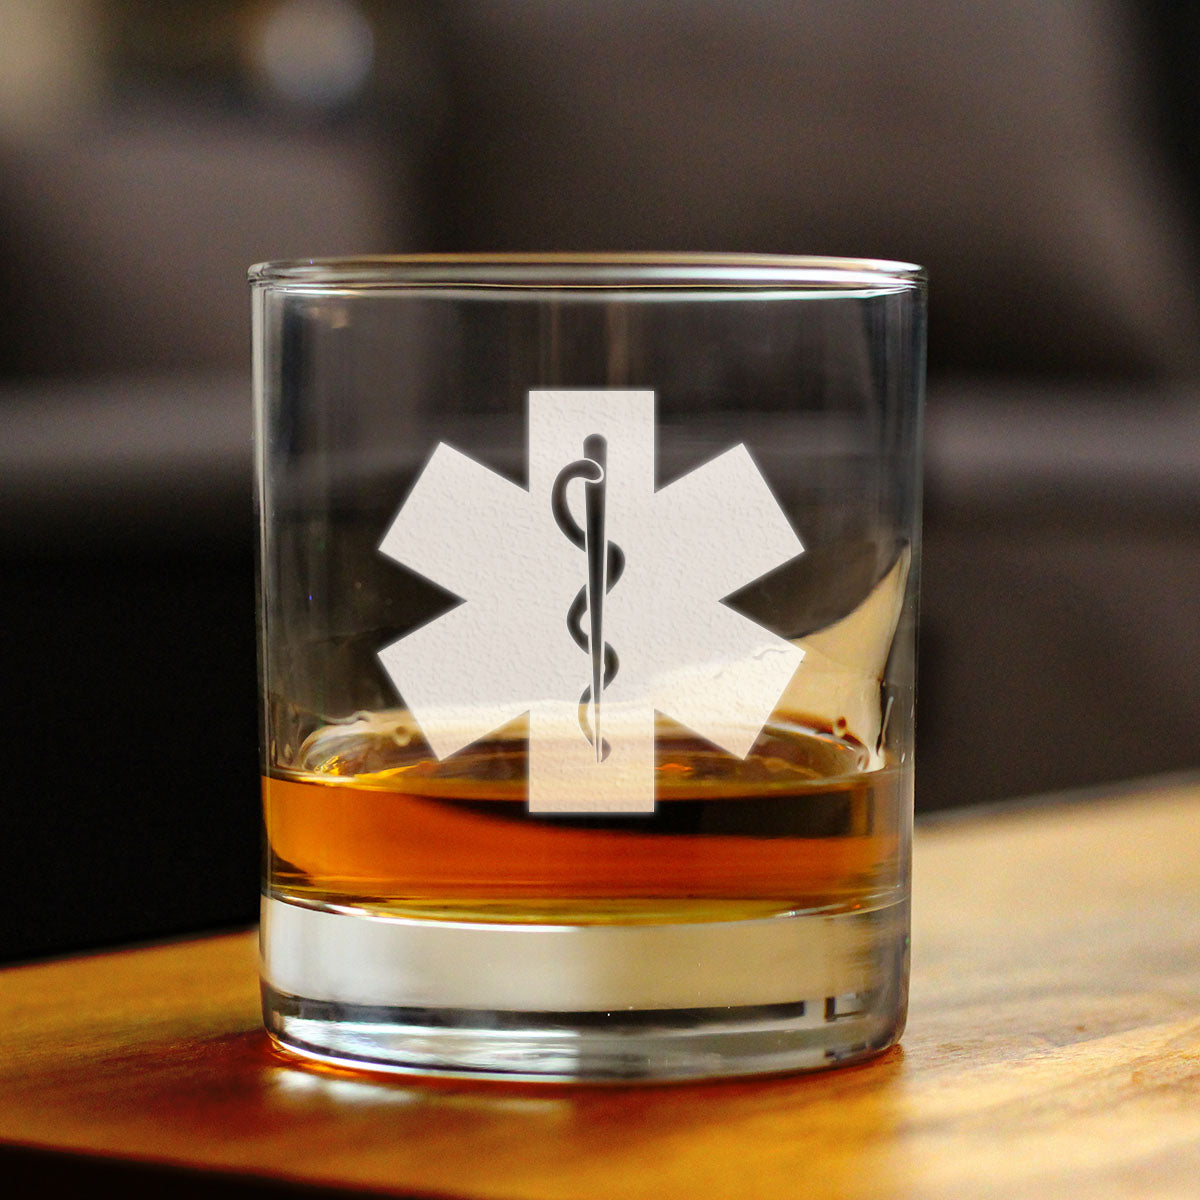 EMT Star of Life Whiskey Rocks Glass - EMS Themed Gifts for Paramedics and EMTS - 10.25 Oz